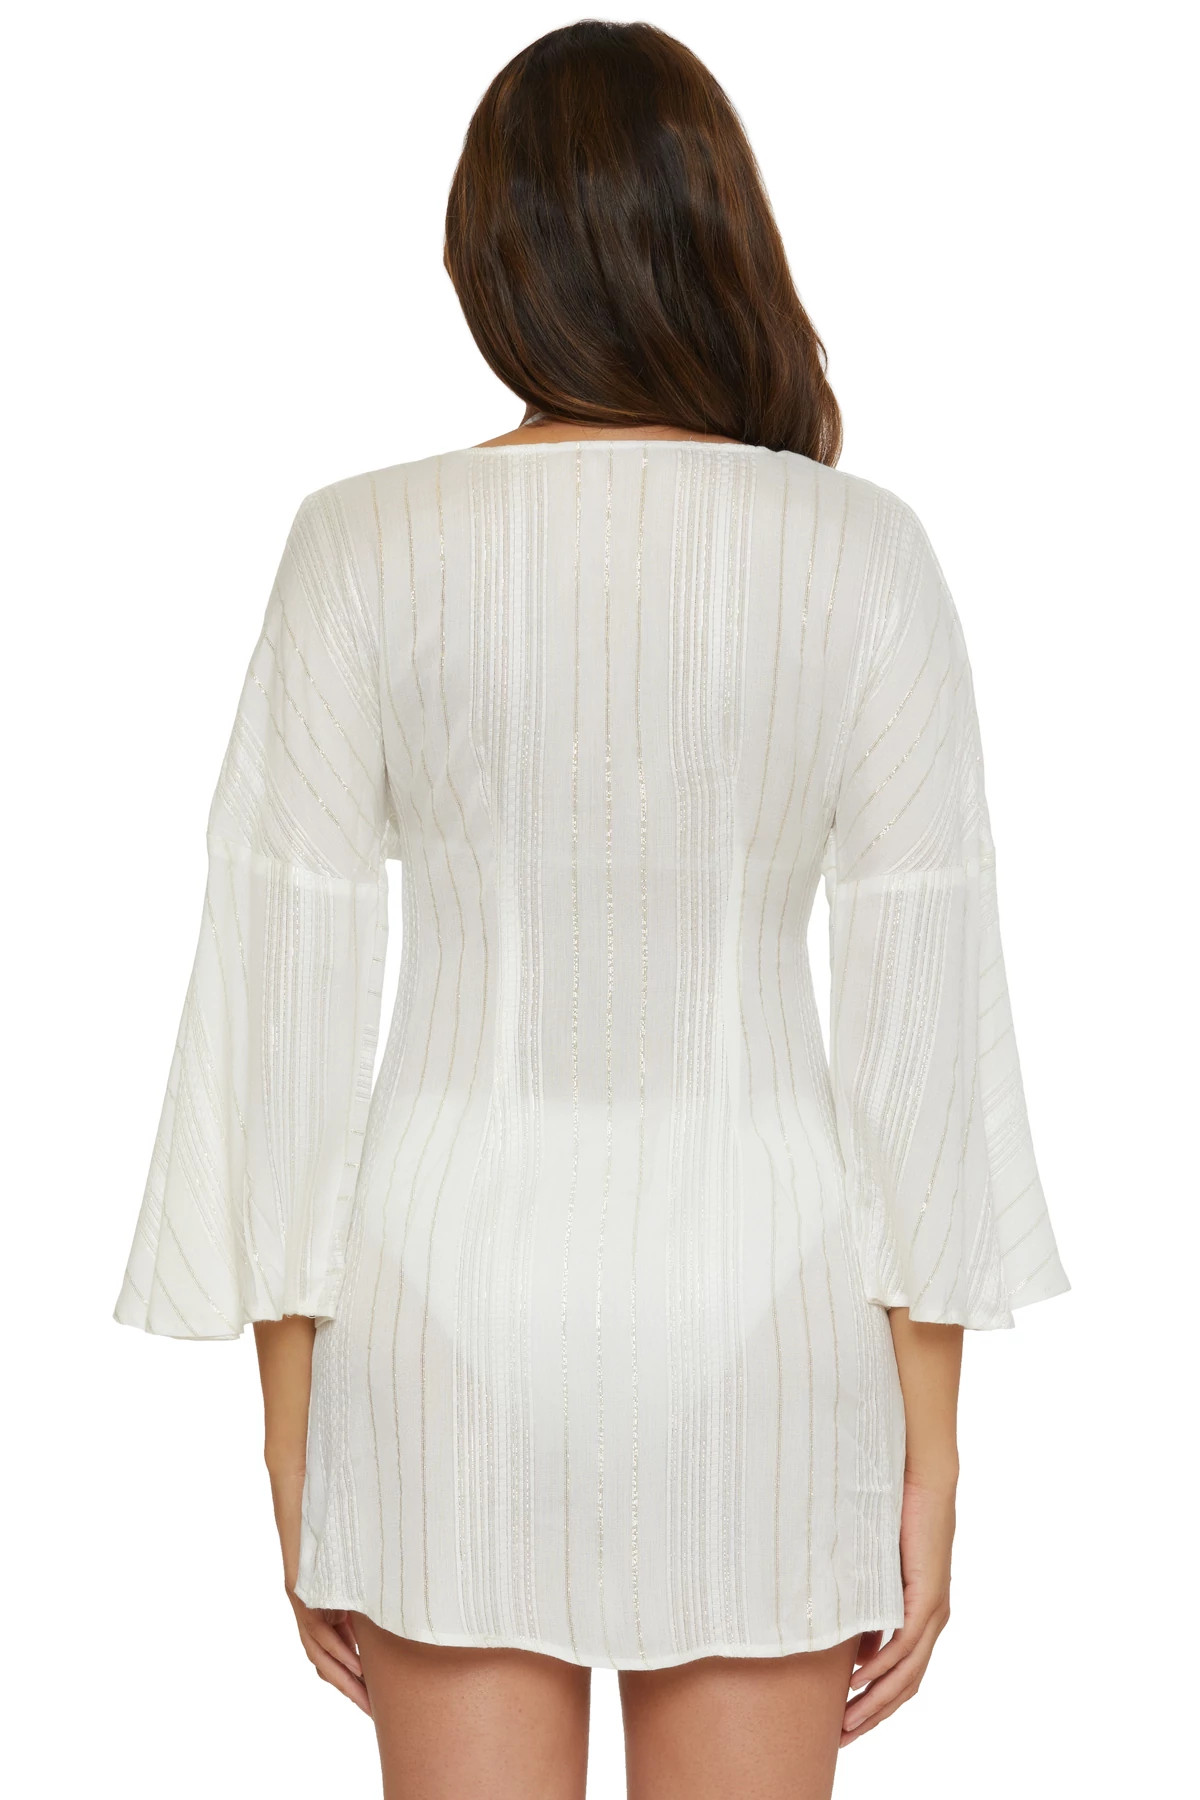 WHITE Radiance Tie Front Tunic image number 2